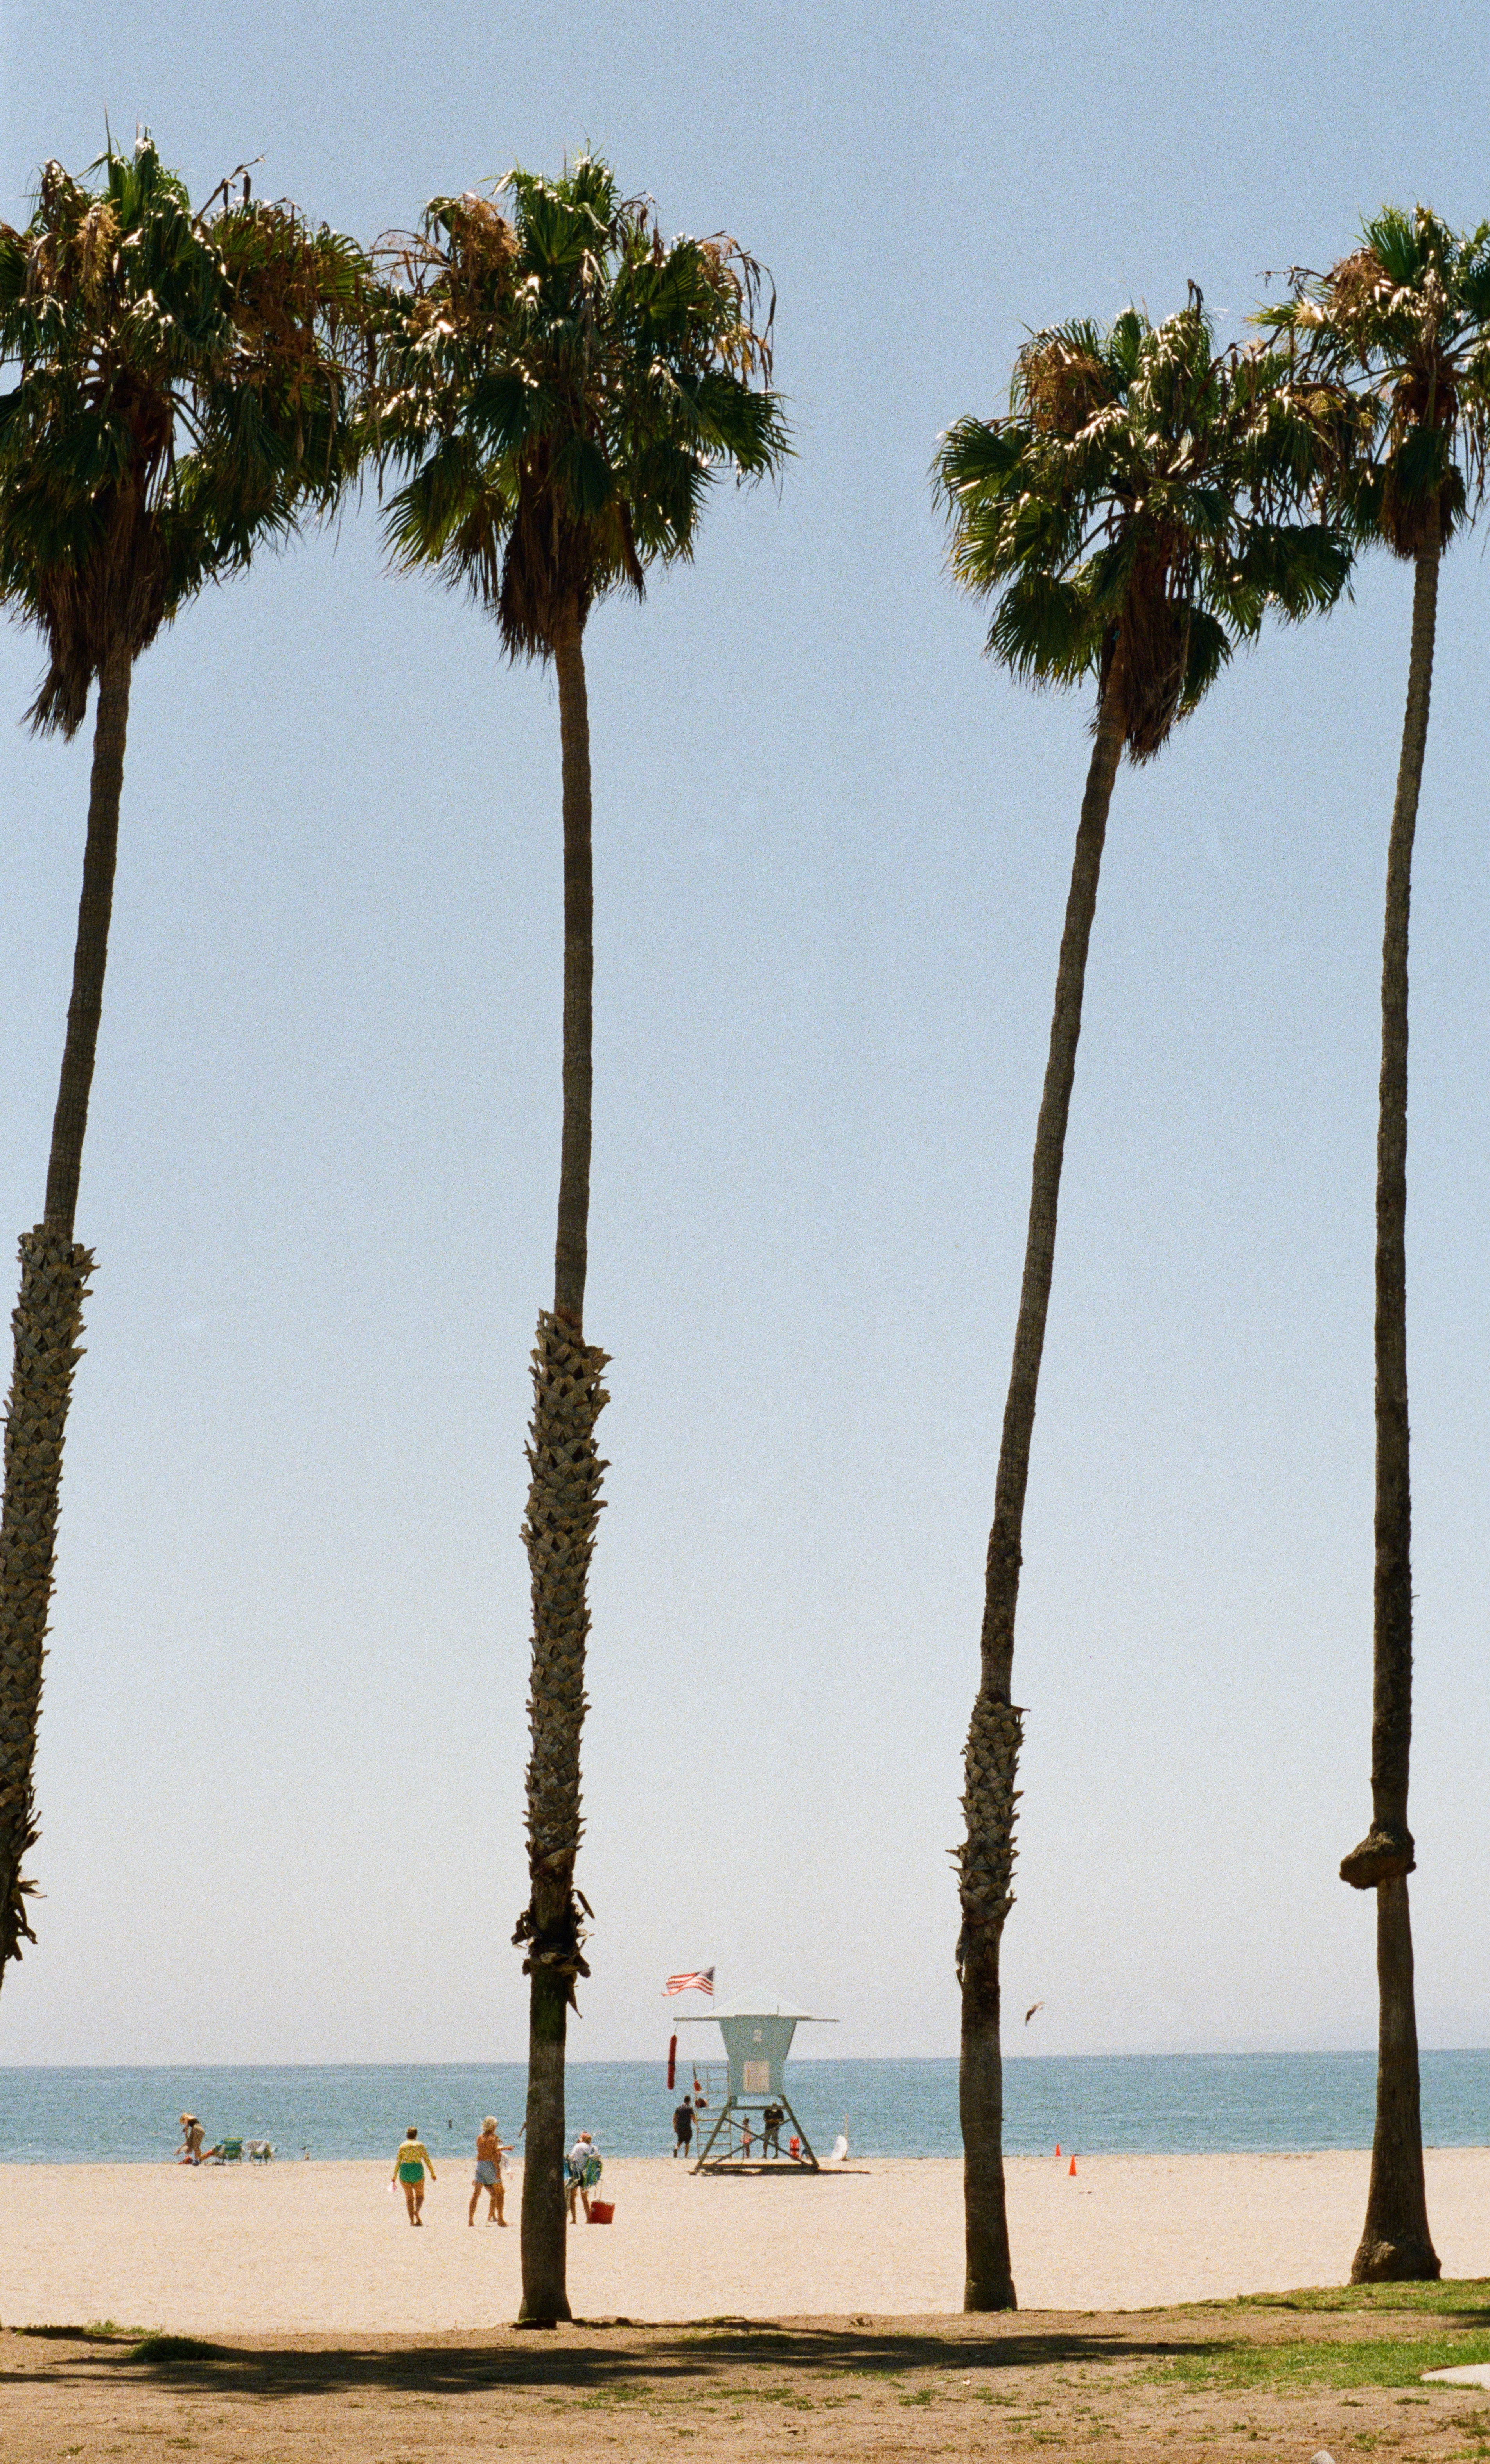 A photo that shows palm trees on the beach against a blue sky. 